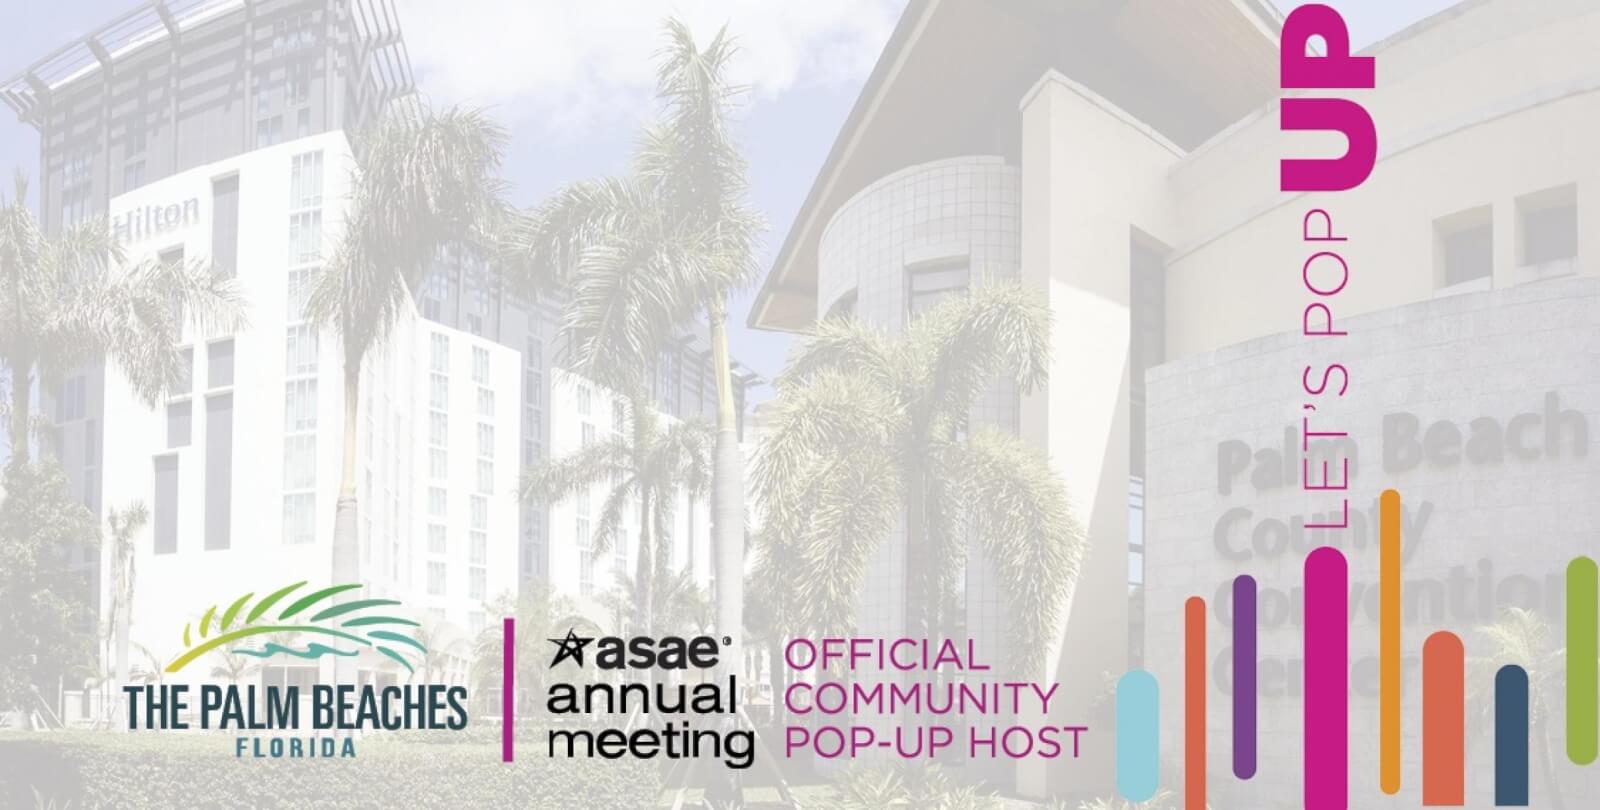 ASAE Annual Meeting & Exposition